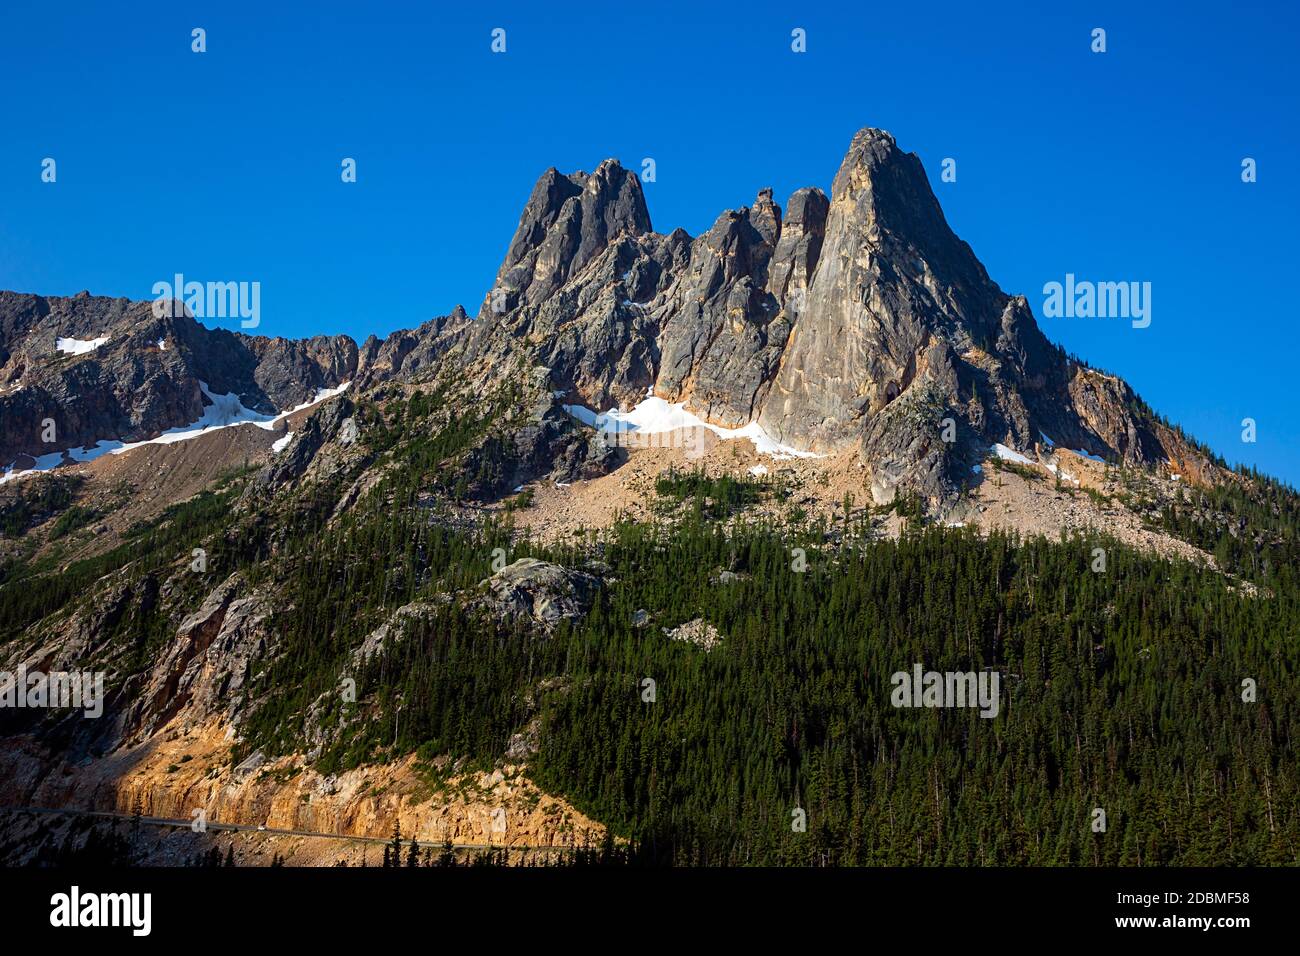 WA18157-00...WASHINGTON - View of Libery Bell and the Early Winters Spires from the Washington Pass Overlook on the North Cascades Scenic Byway. Stock Photo